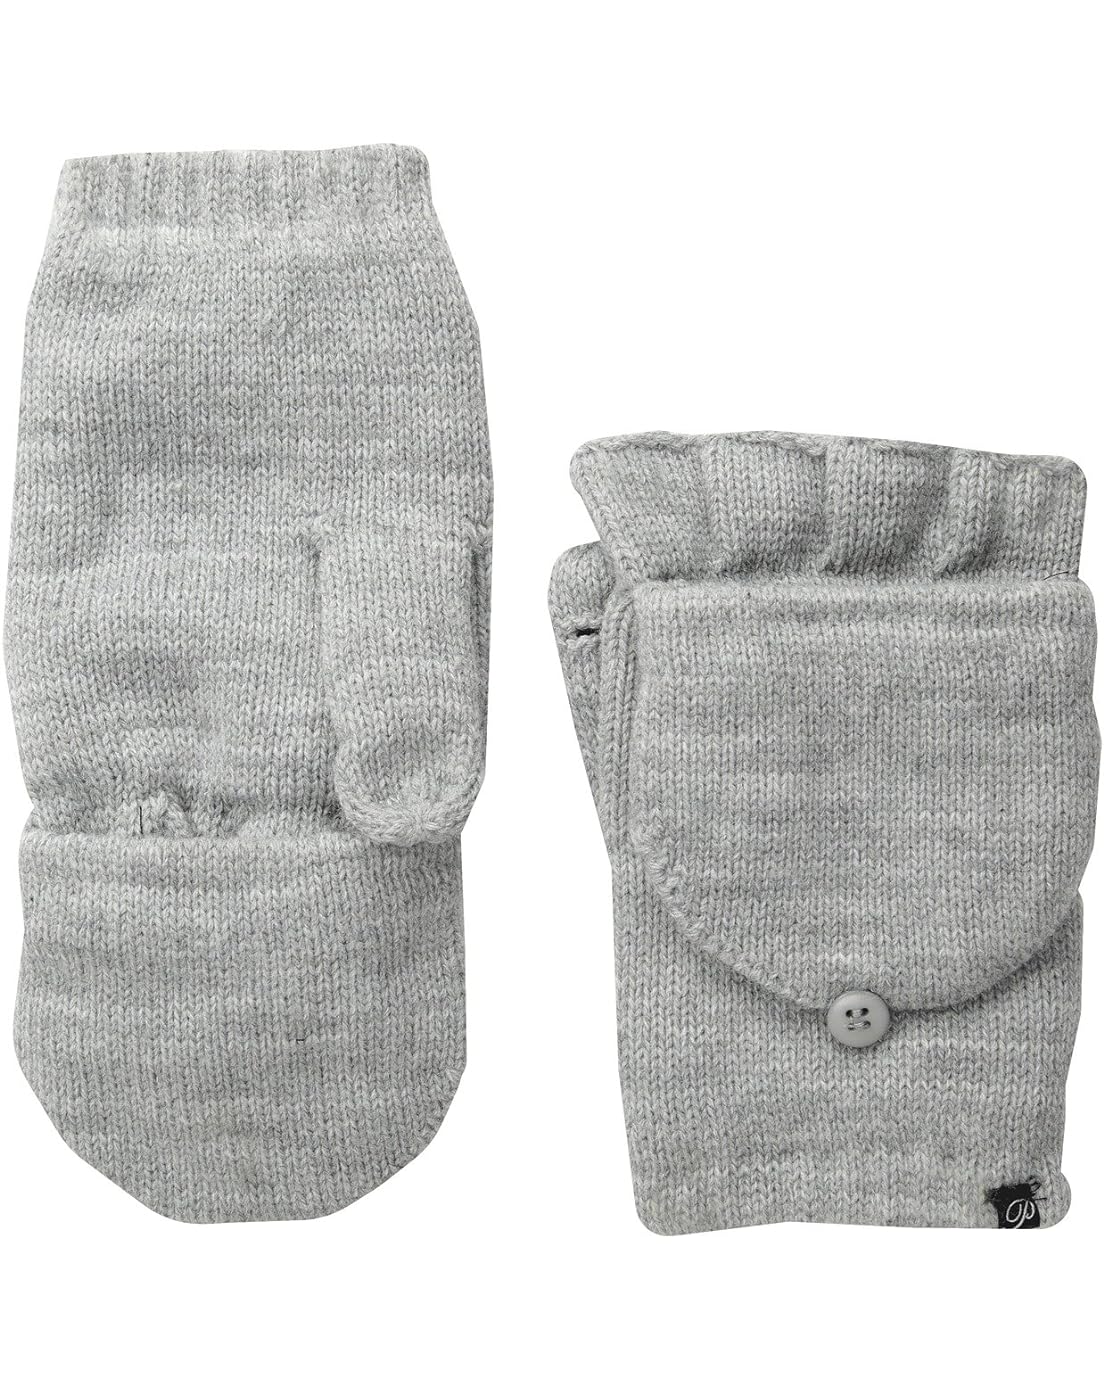  Plush Fleece-Lined Texting Mittens